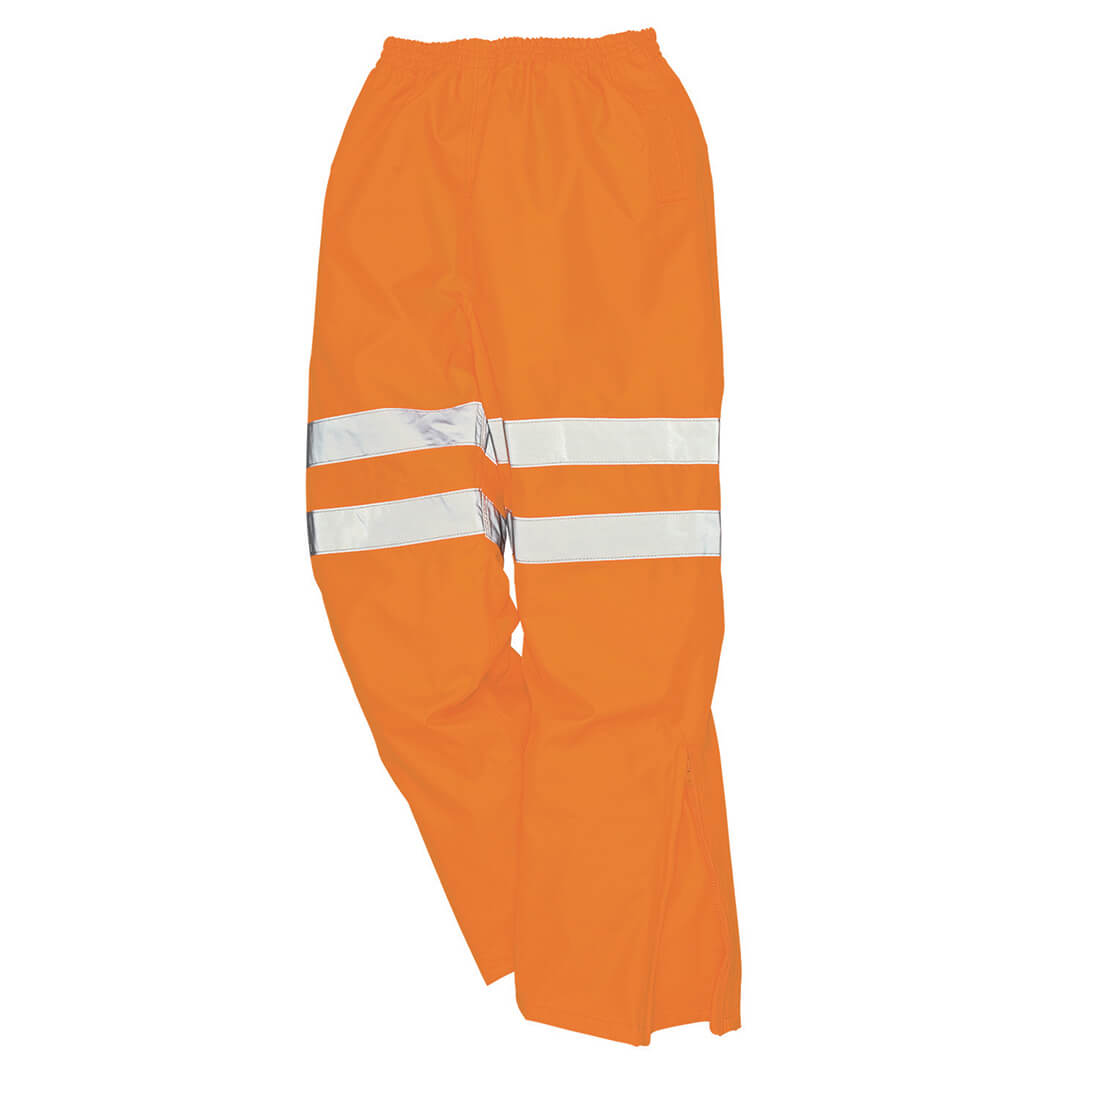 Image of Oxford Weave 300D Class 2 Breathable Hi Vis Breathable Trousers Orange XS